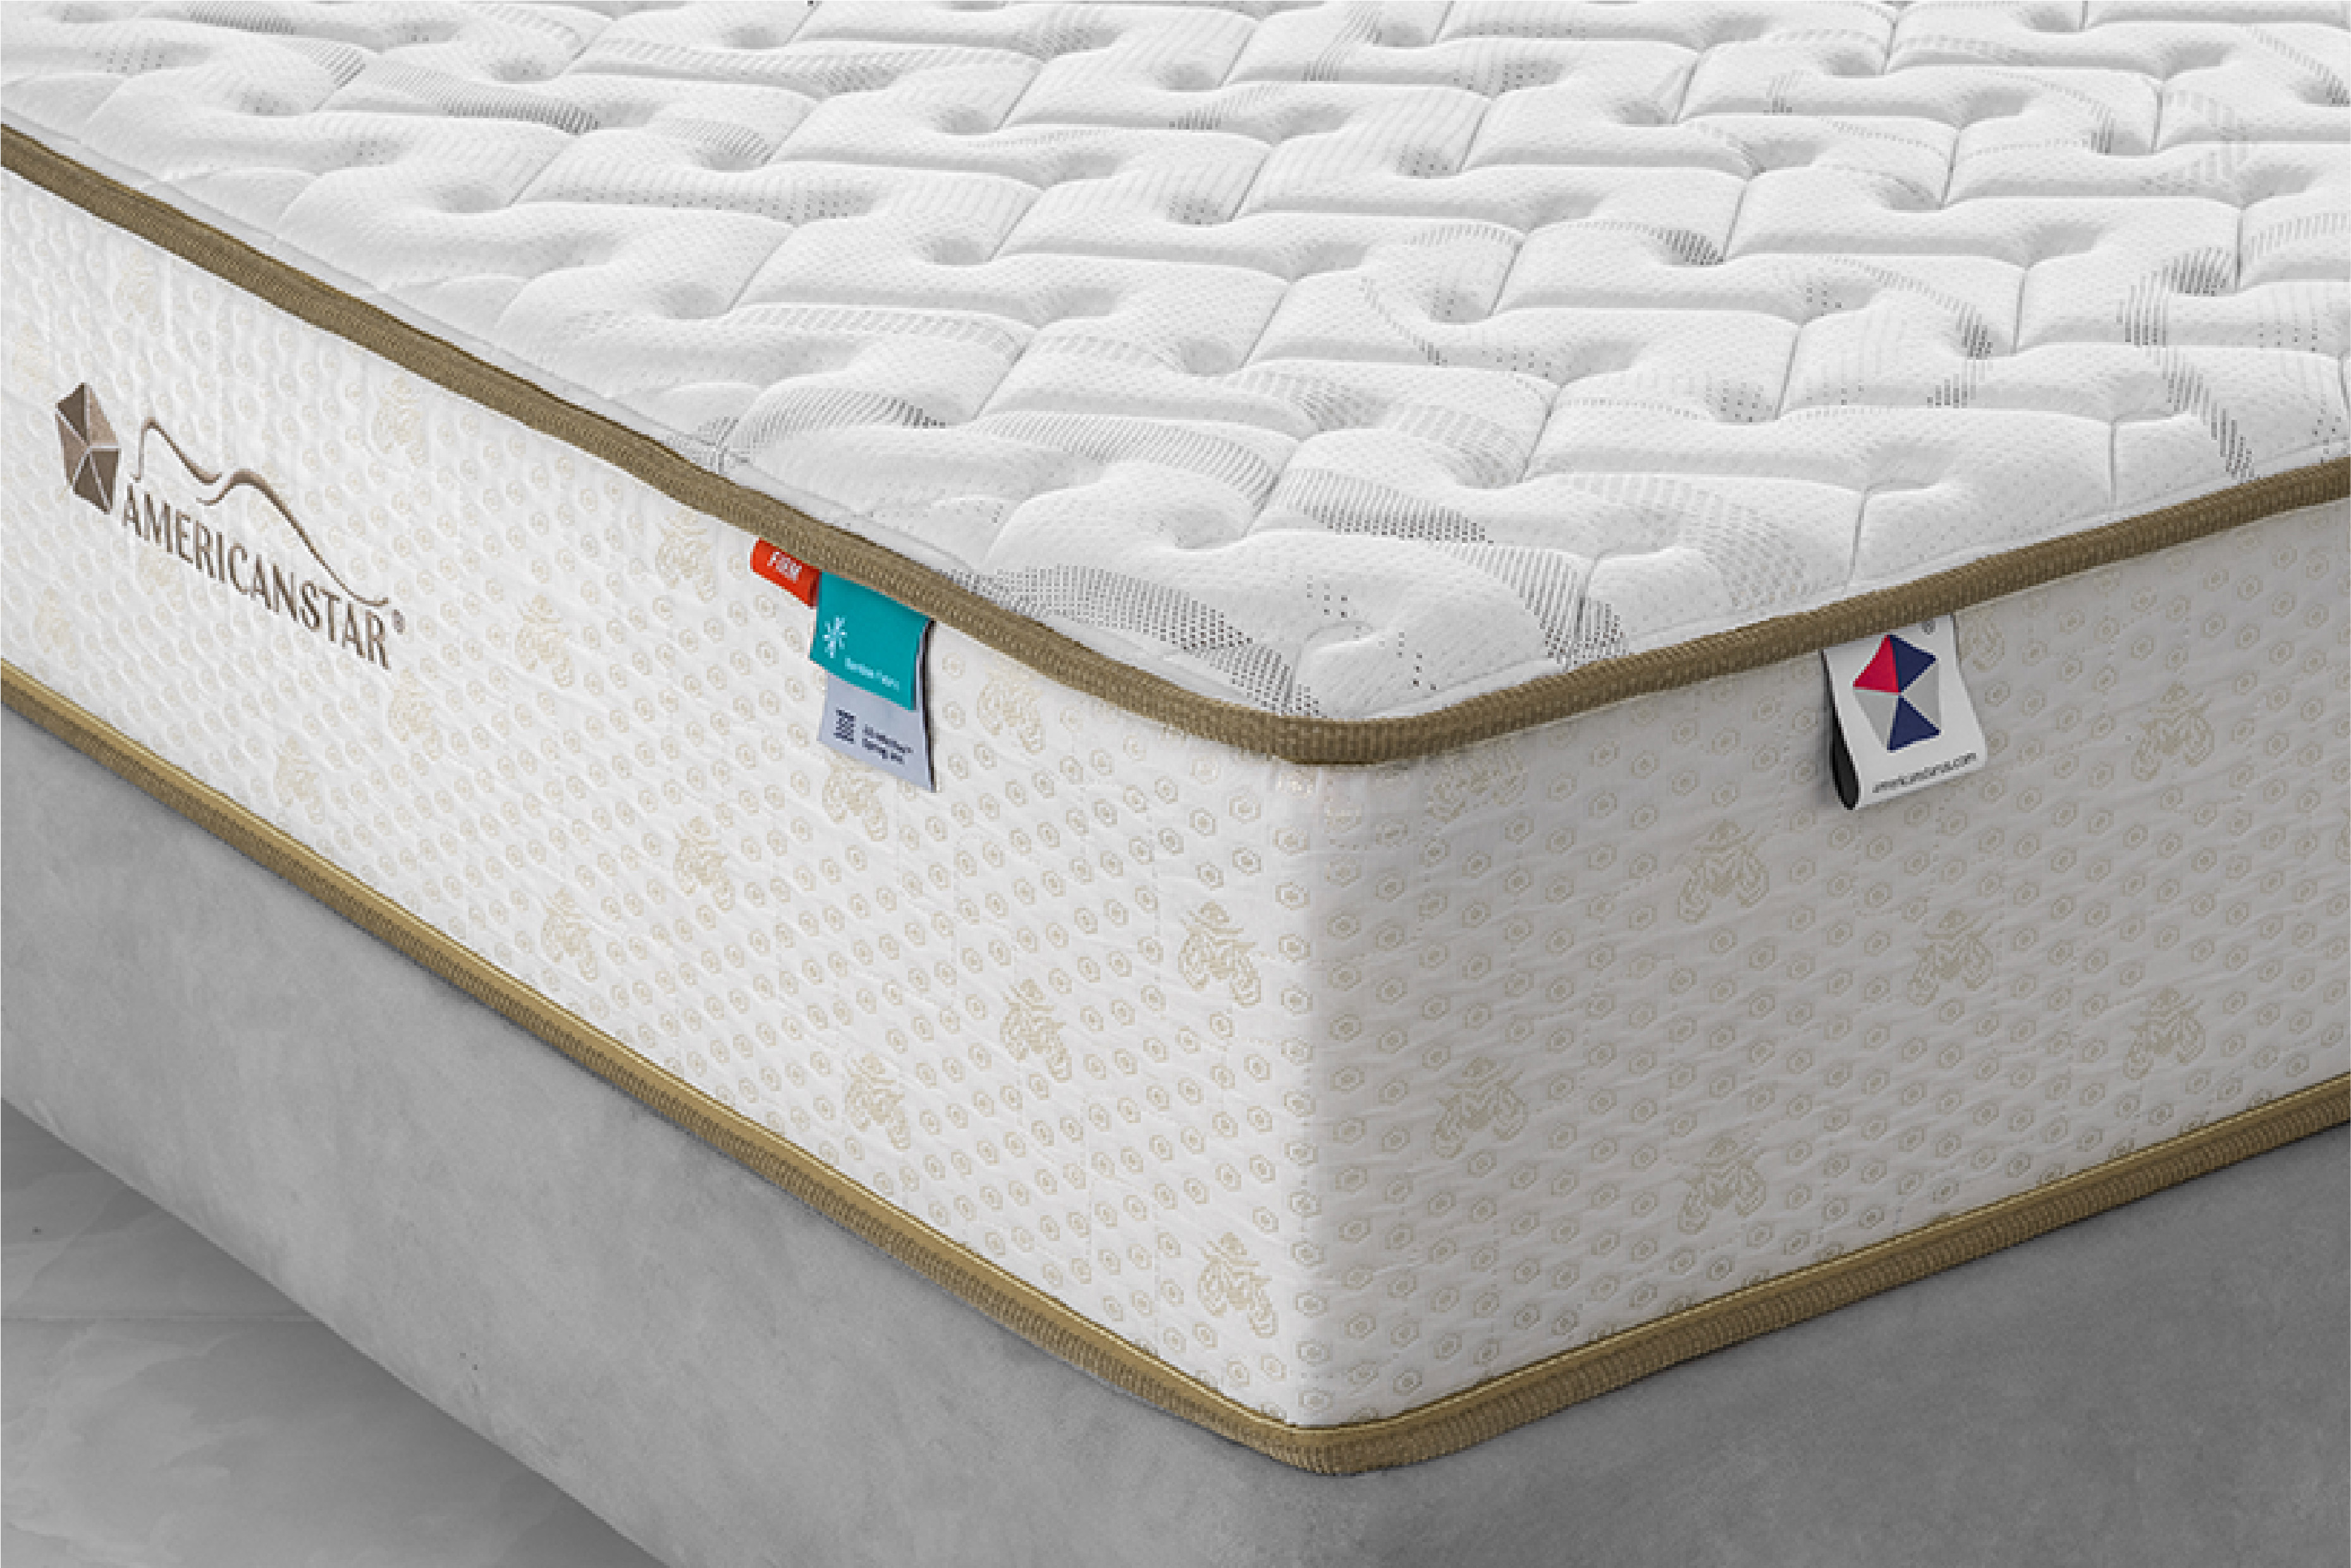 What Is A Tight Top Mattress?